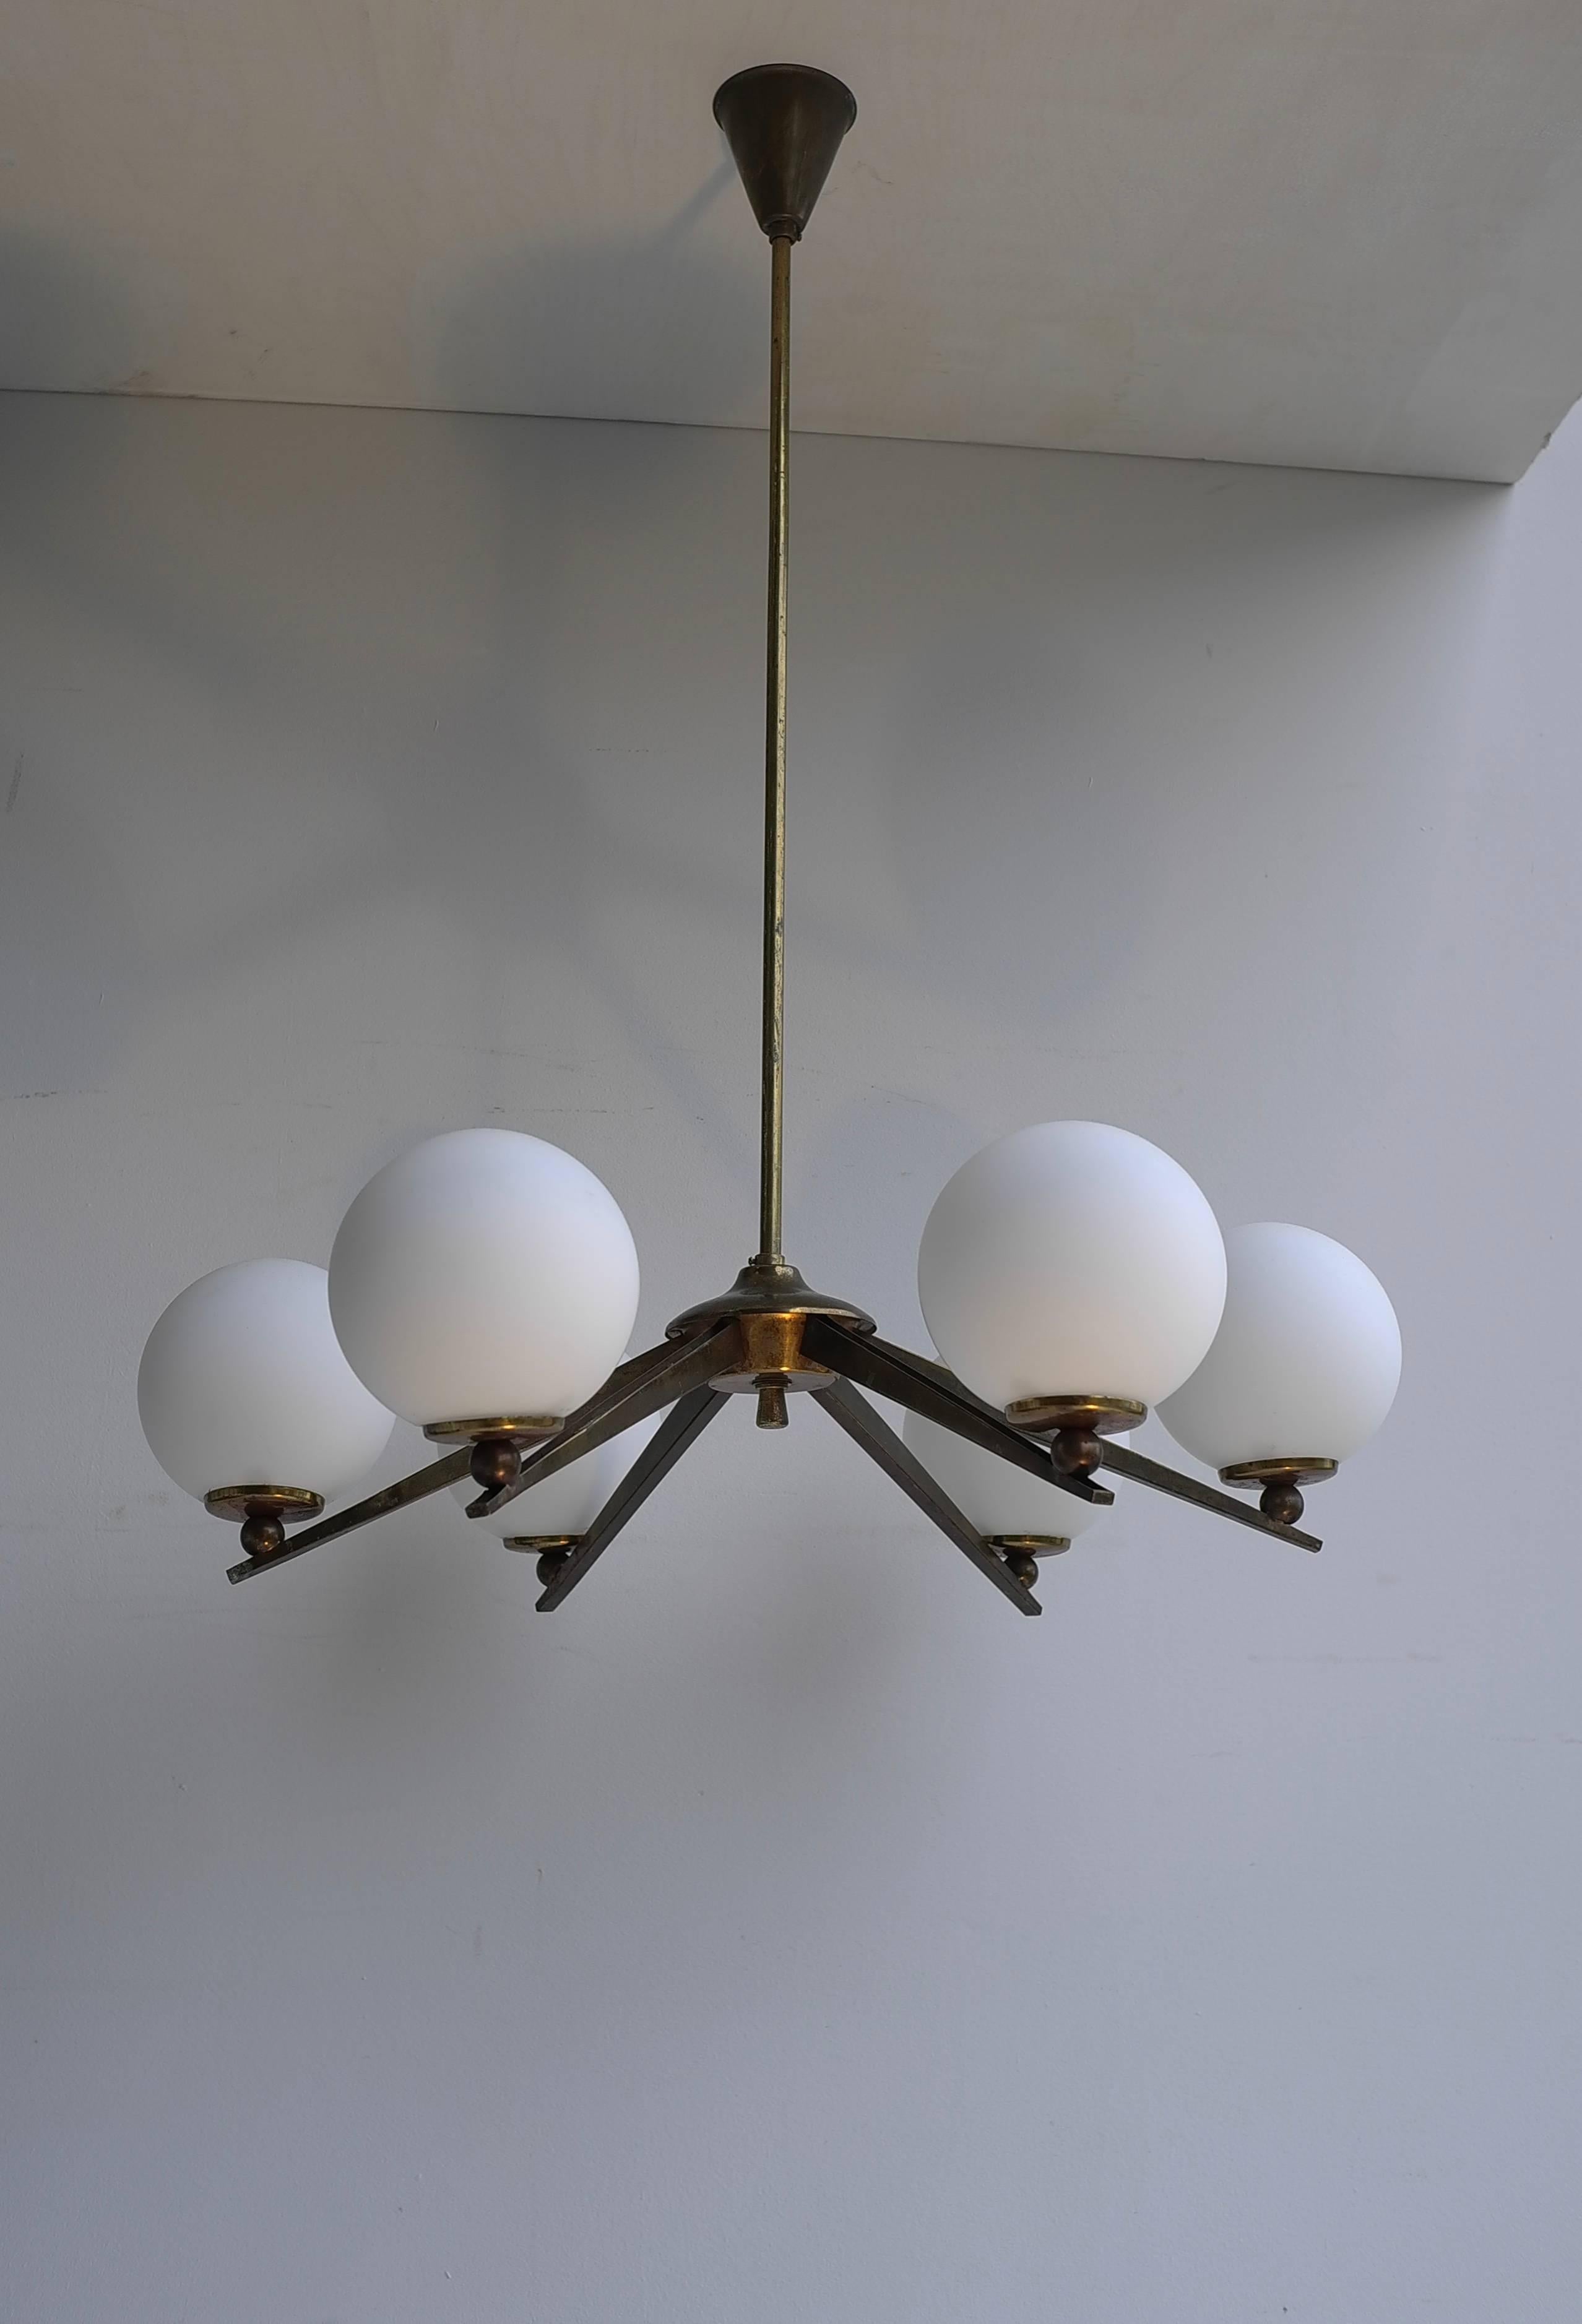 Mid-20th Century Italian Chandelier in Brass with Opaline Glass Balls, Italy, 1950s